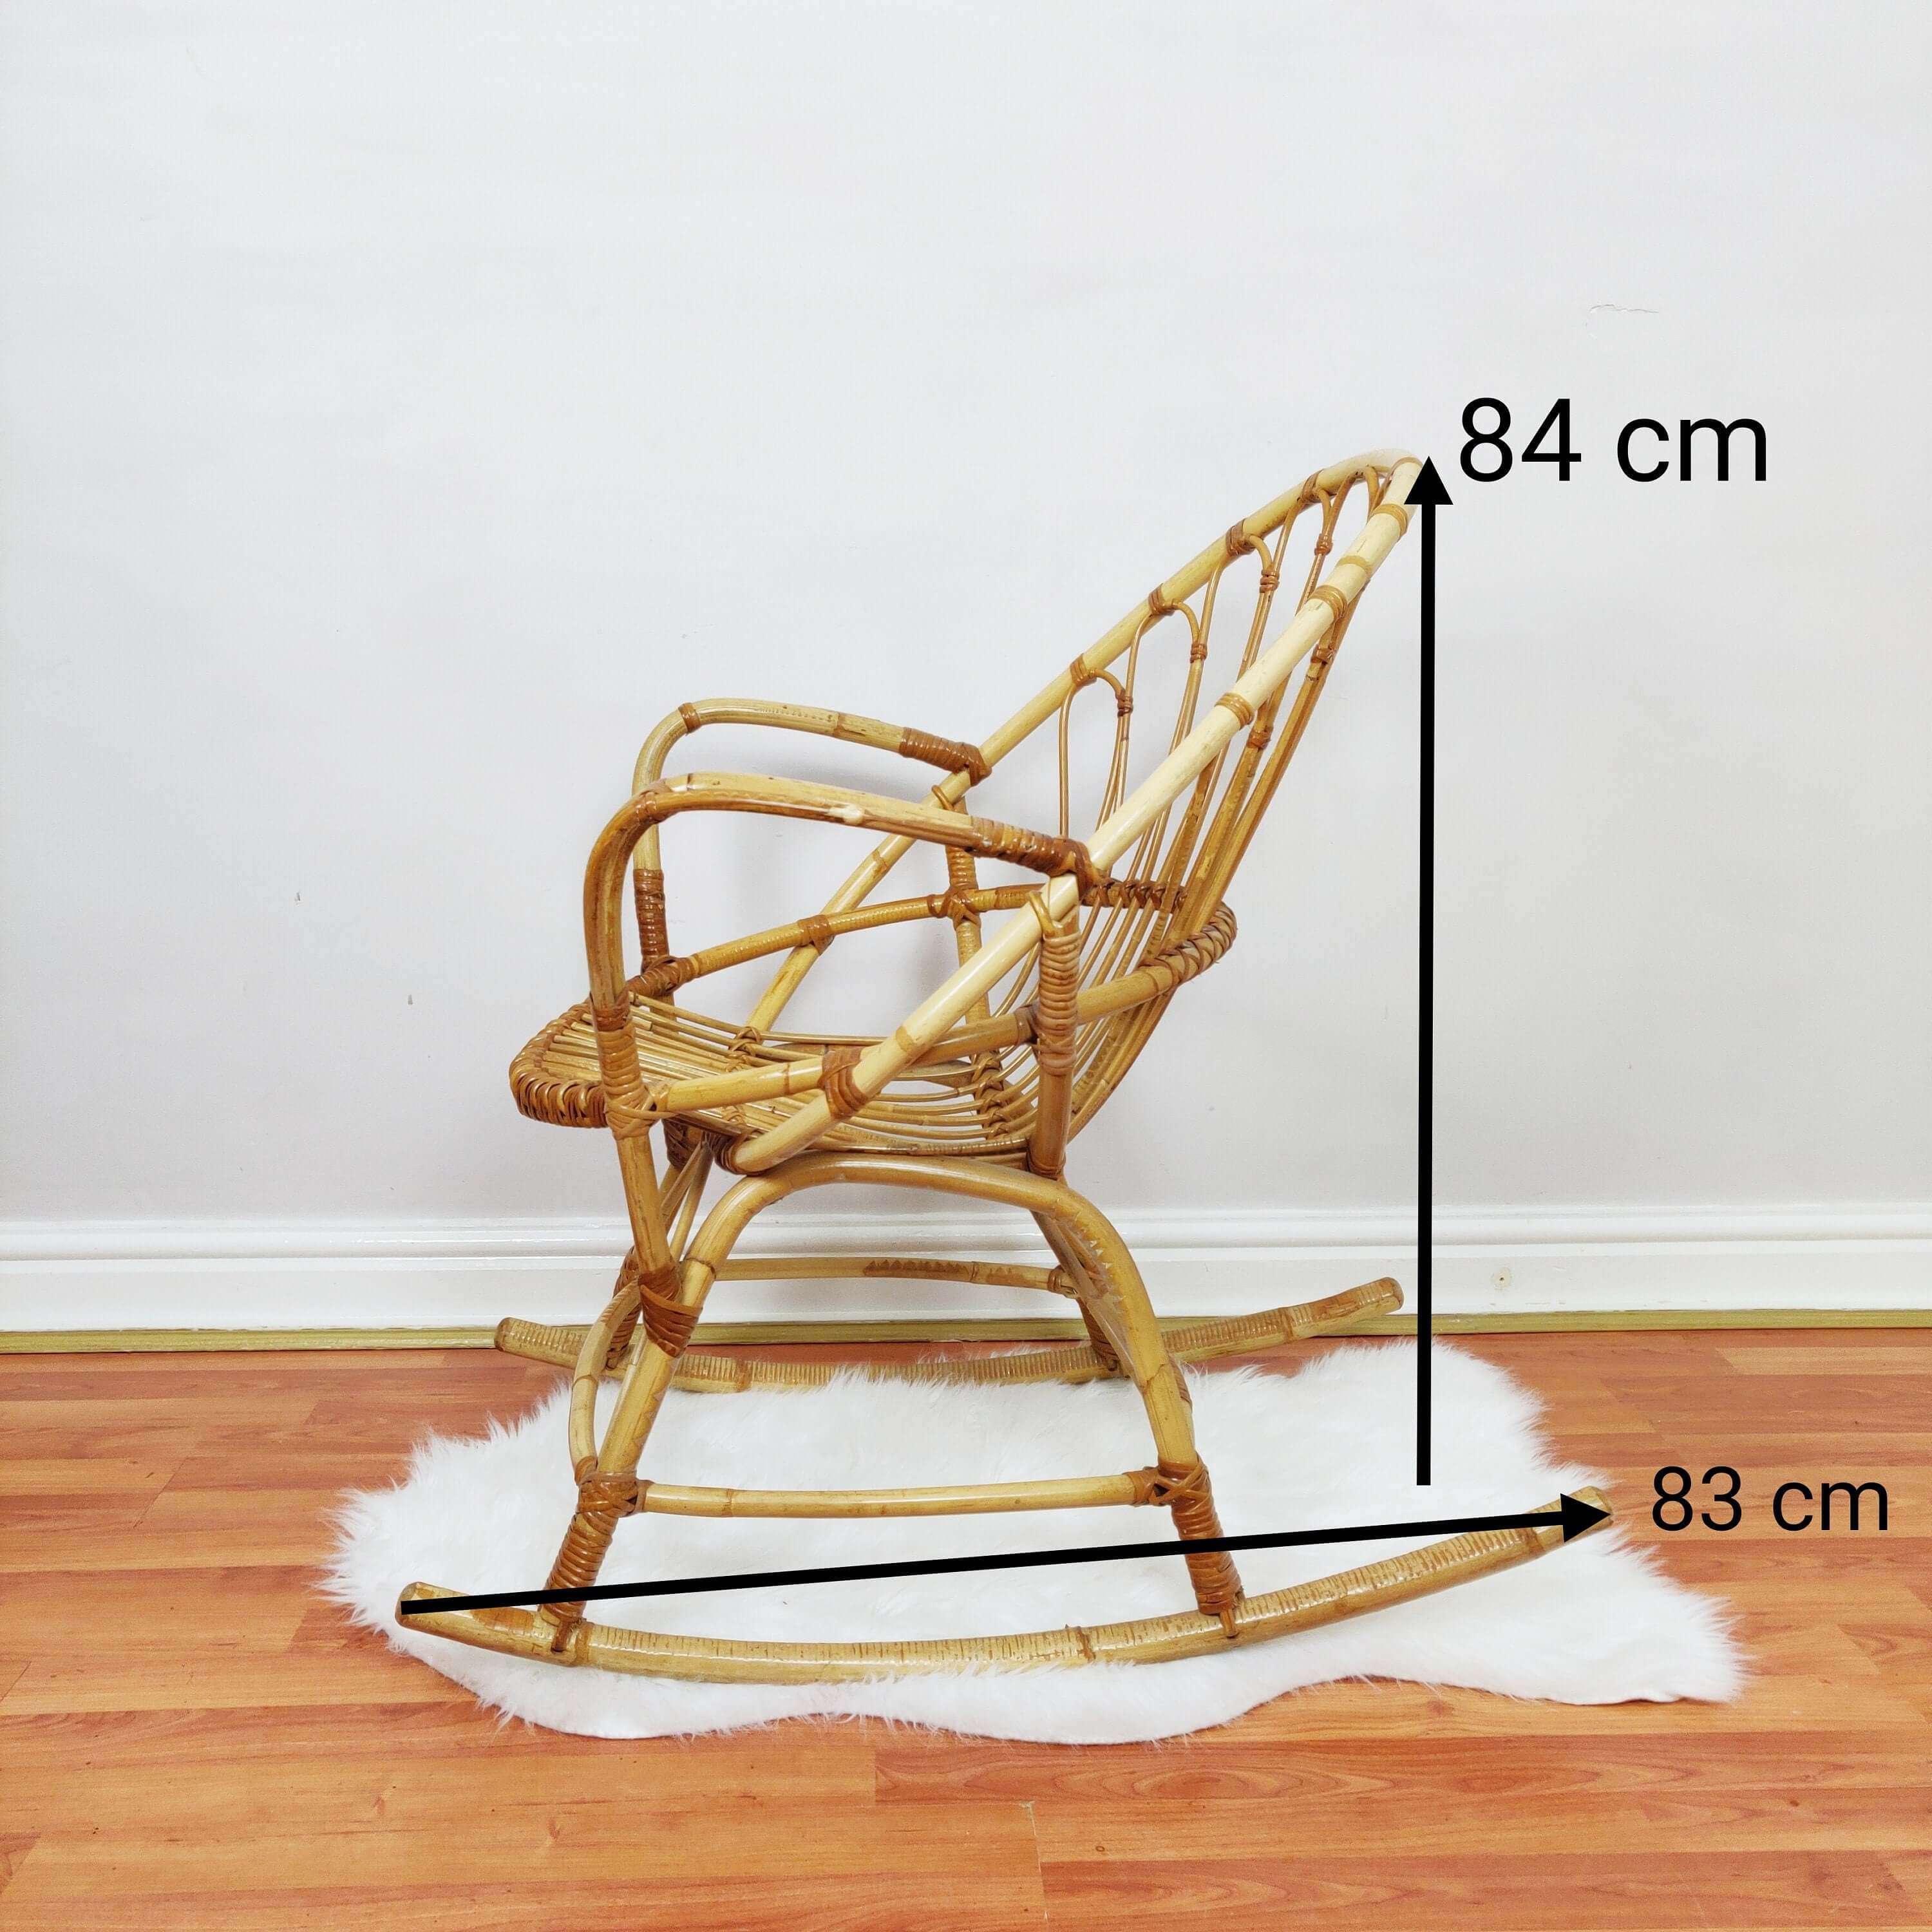 Bamboo Rocking Chair with measurements